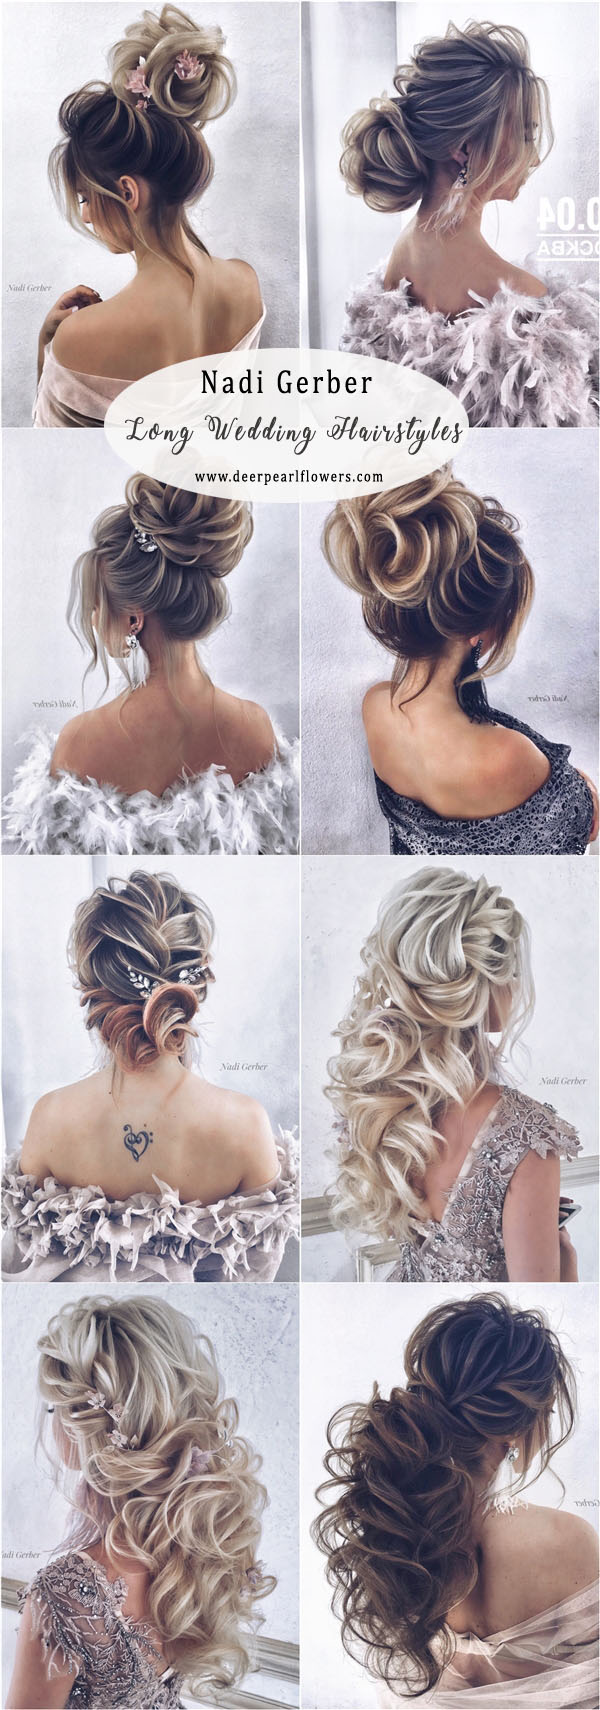 Long Wedding Hairstyles and Updos for Bride